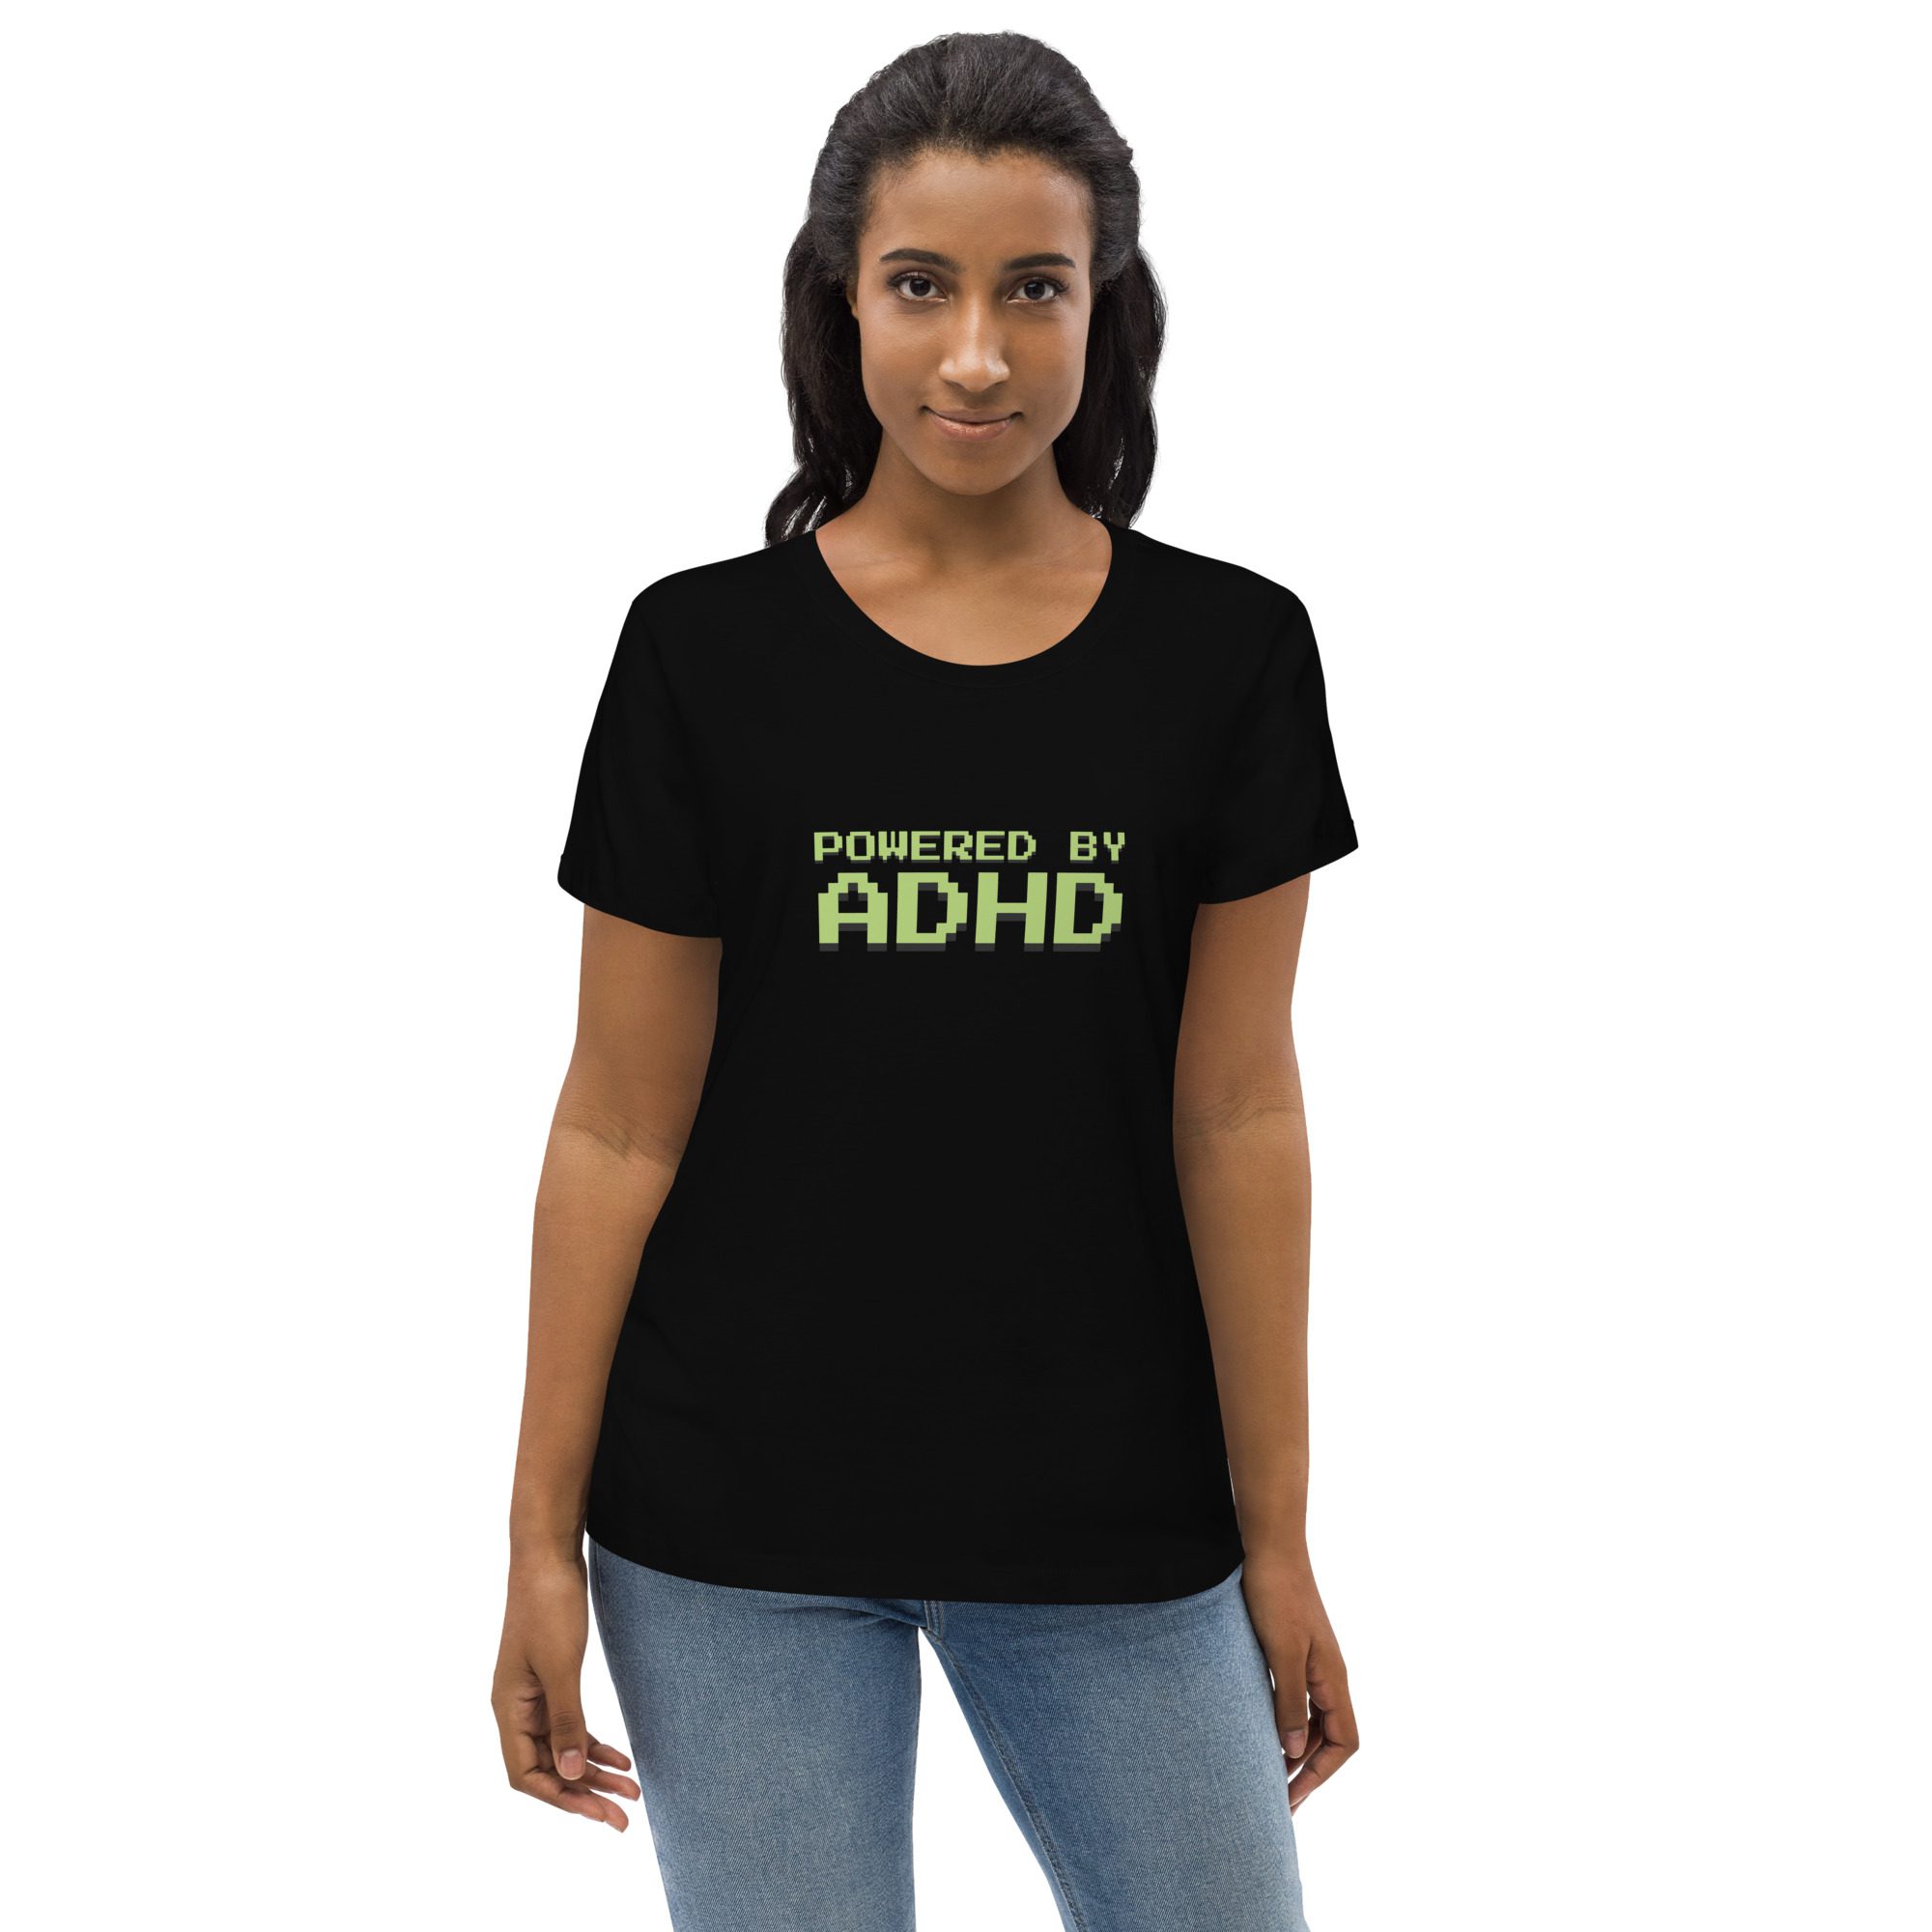 Powered By ADHD Women's Fitted Eco T-shirt